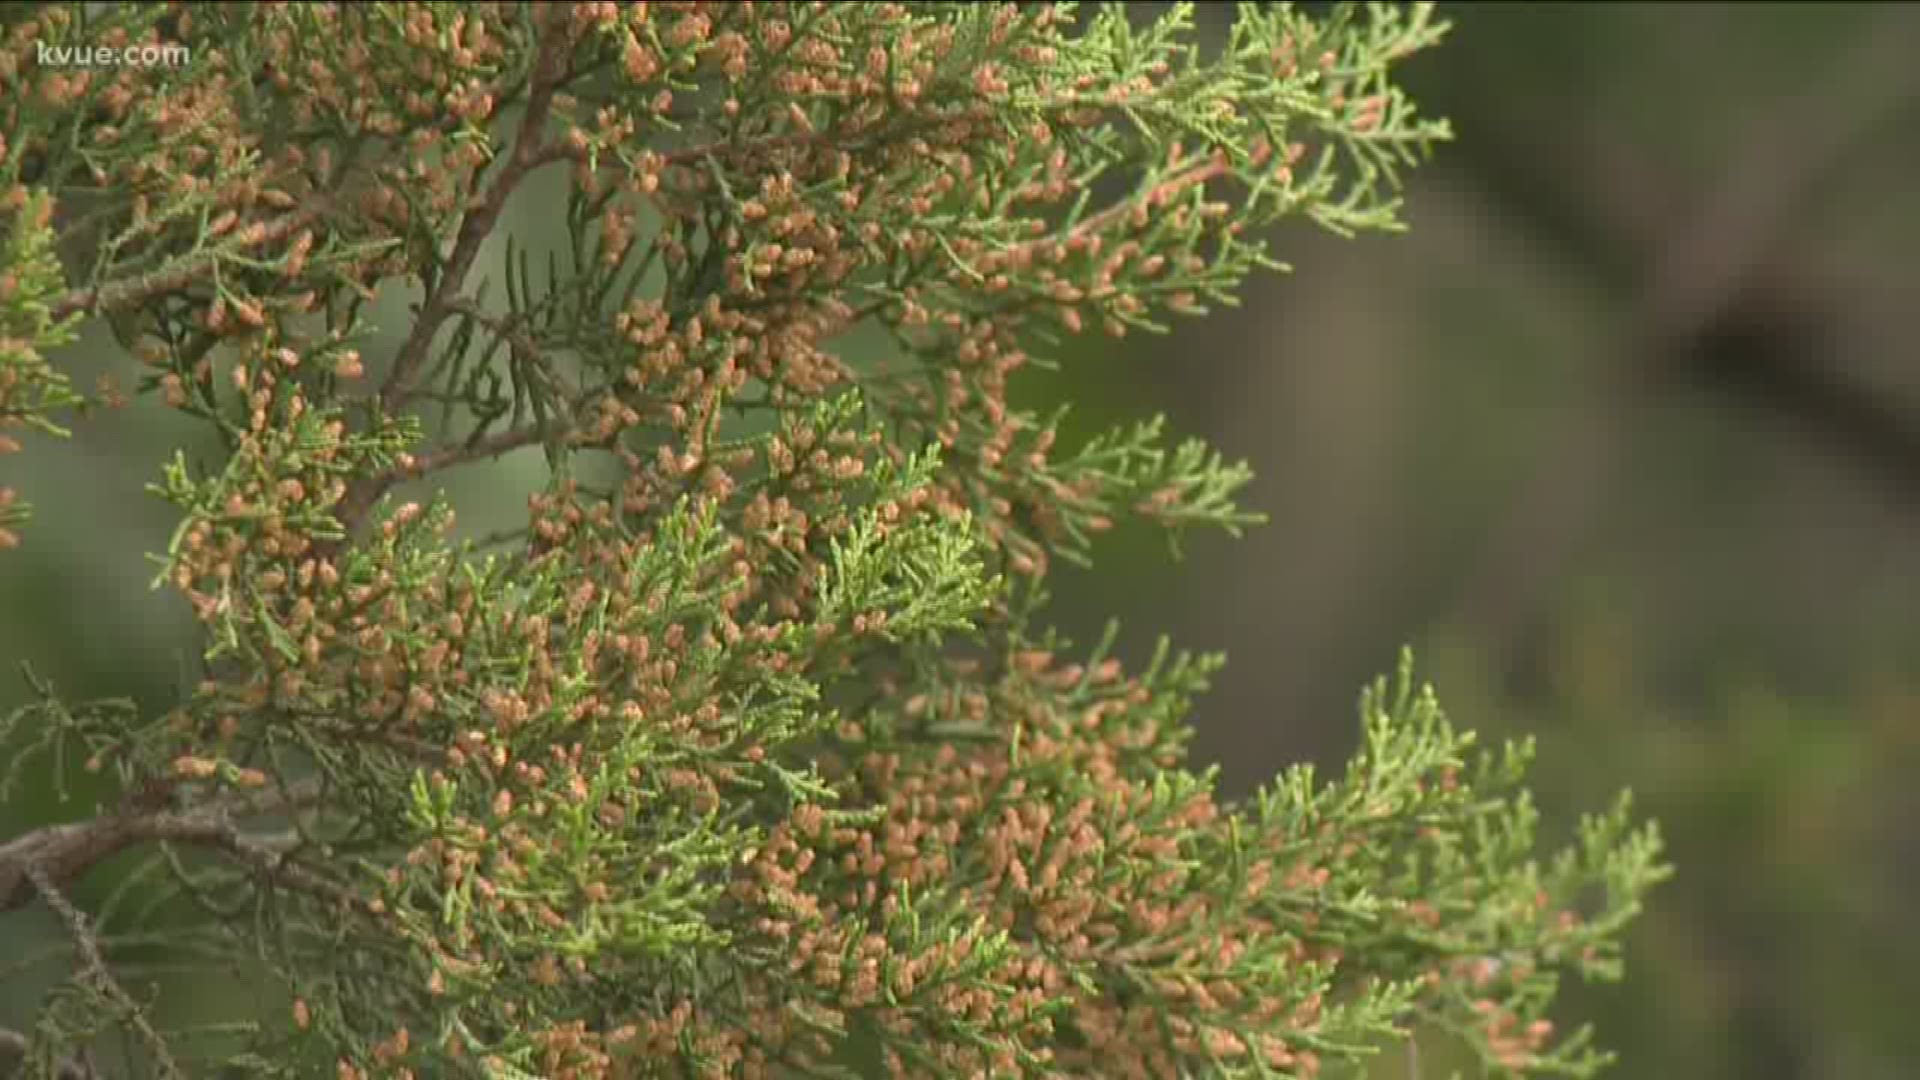 Doctors say it might be best for you to stay indoors as much as possible if you're really allergic to cedar pollen.